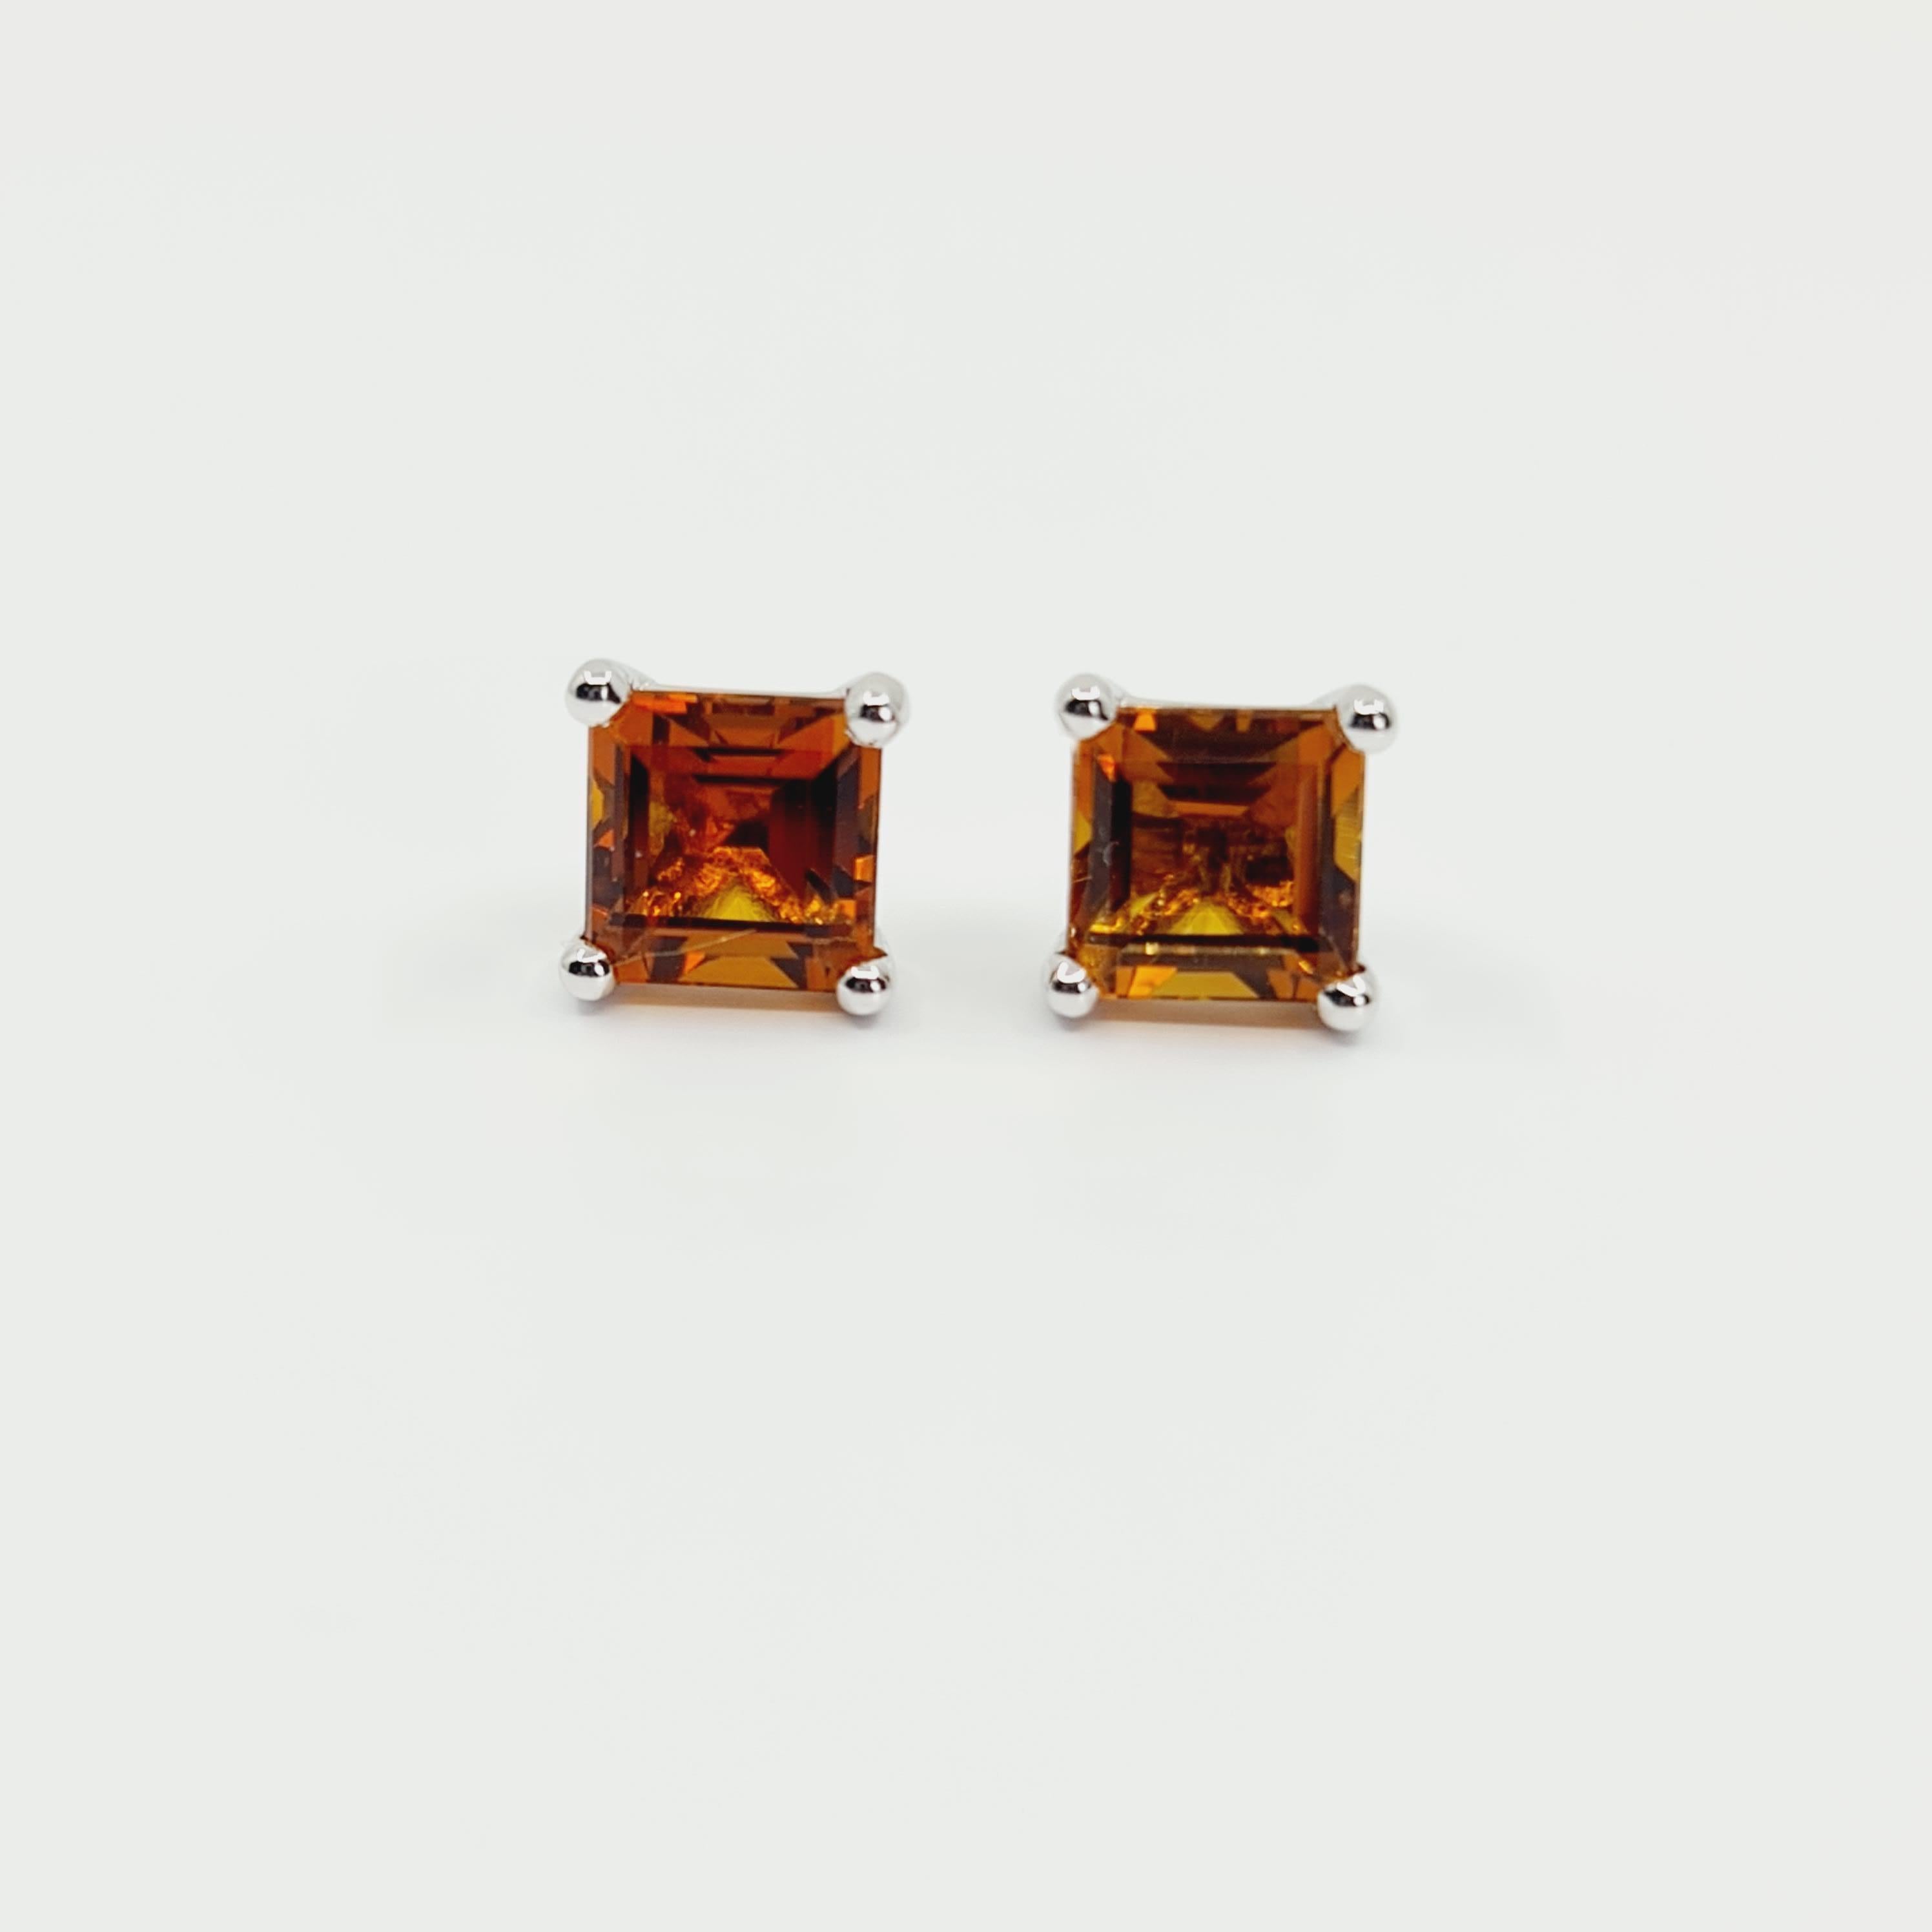 18K White Gold Citrine Studs 3.60 Carat 1.1x1.1cm.
2x 1.80ct Square Cut Citrine Stones. 
High Gloss Polish. Rhodium Plated

Made on demand in Germany.
Production time 2-3 weeks
Feel free to contact us if any questions may arise.

You are looking for